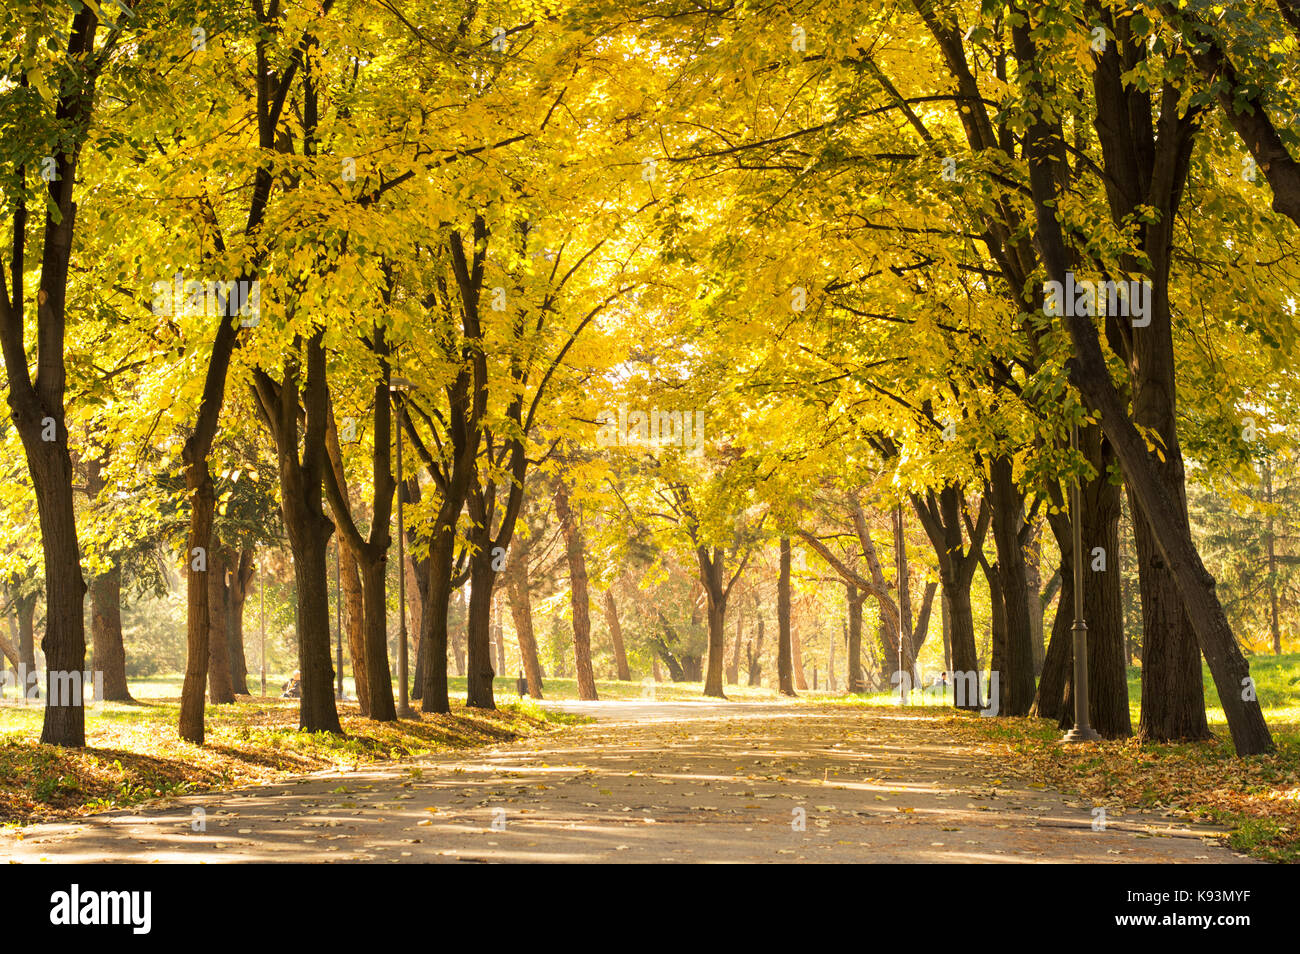 Empty park with fallen autumn leaves. Fall scenery Stock Photo